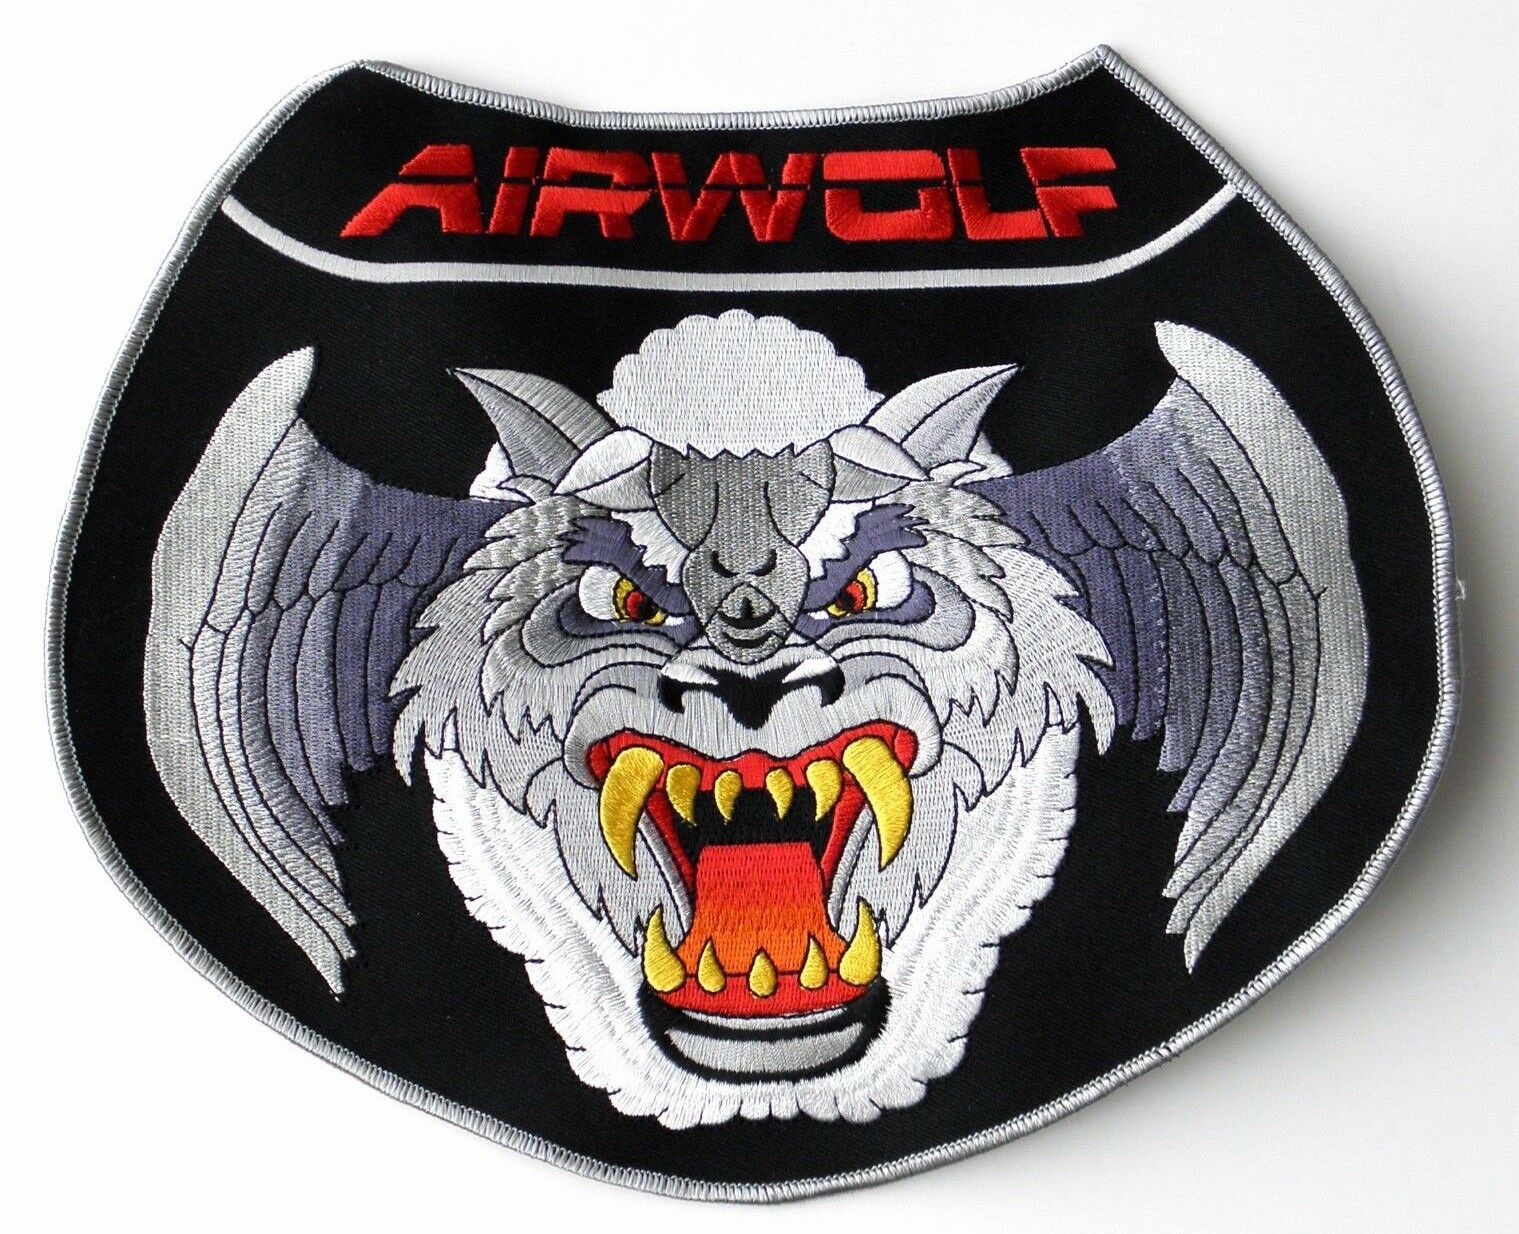 AWF03 AIRWOLF SUBDUED PATCH 